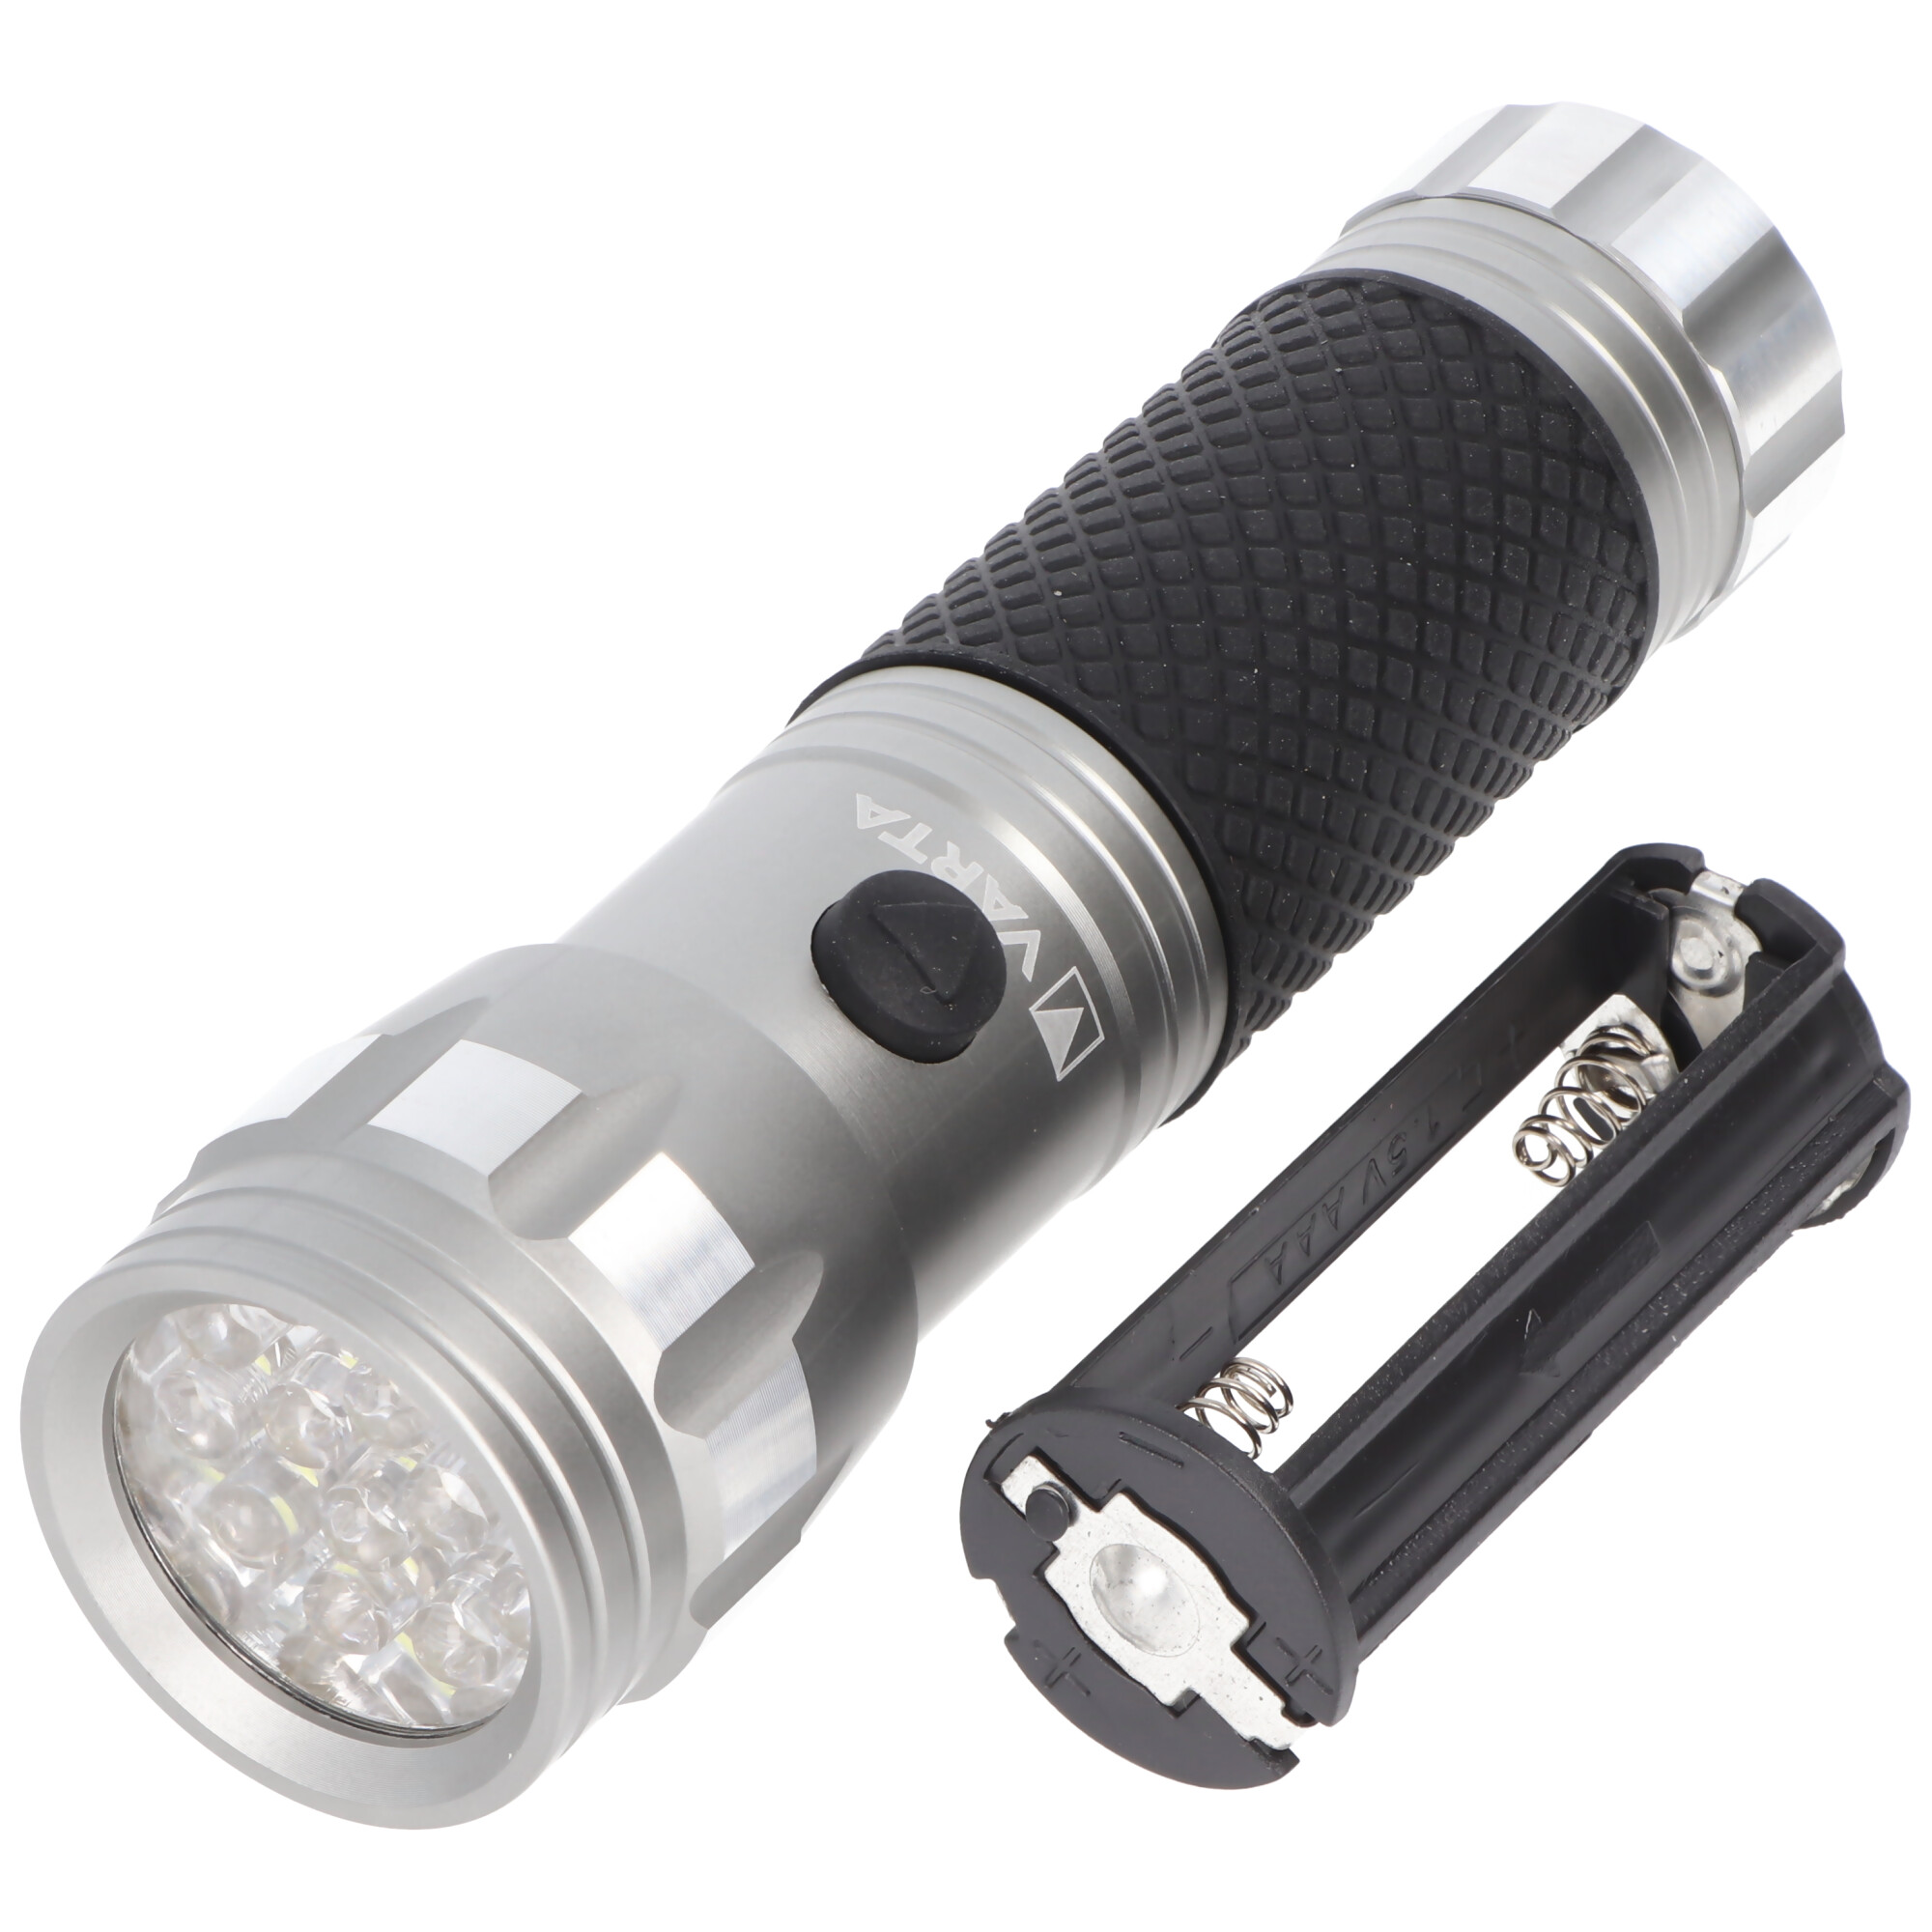 Varta LED Taschenlampe Brite Essential F10 20lm, exkl. 3x Batterie Micro AAA, Retail Blister